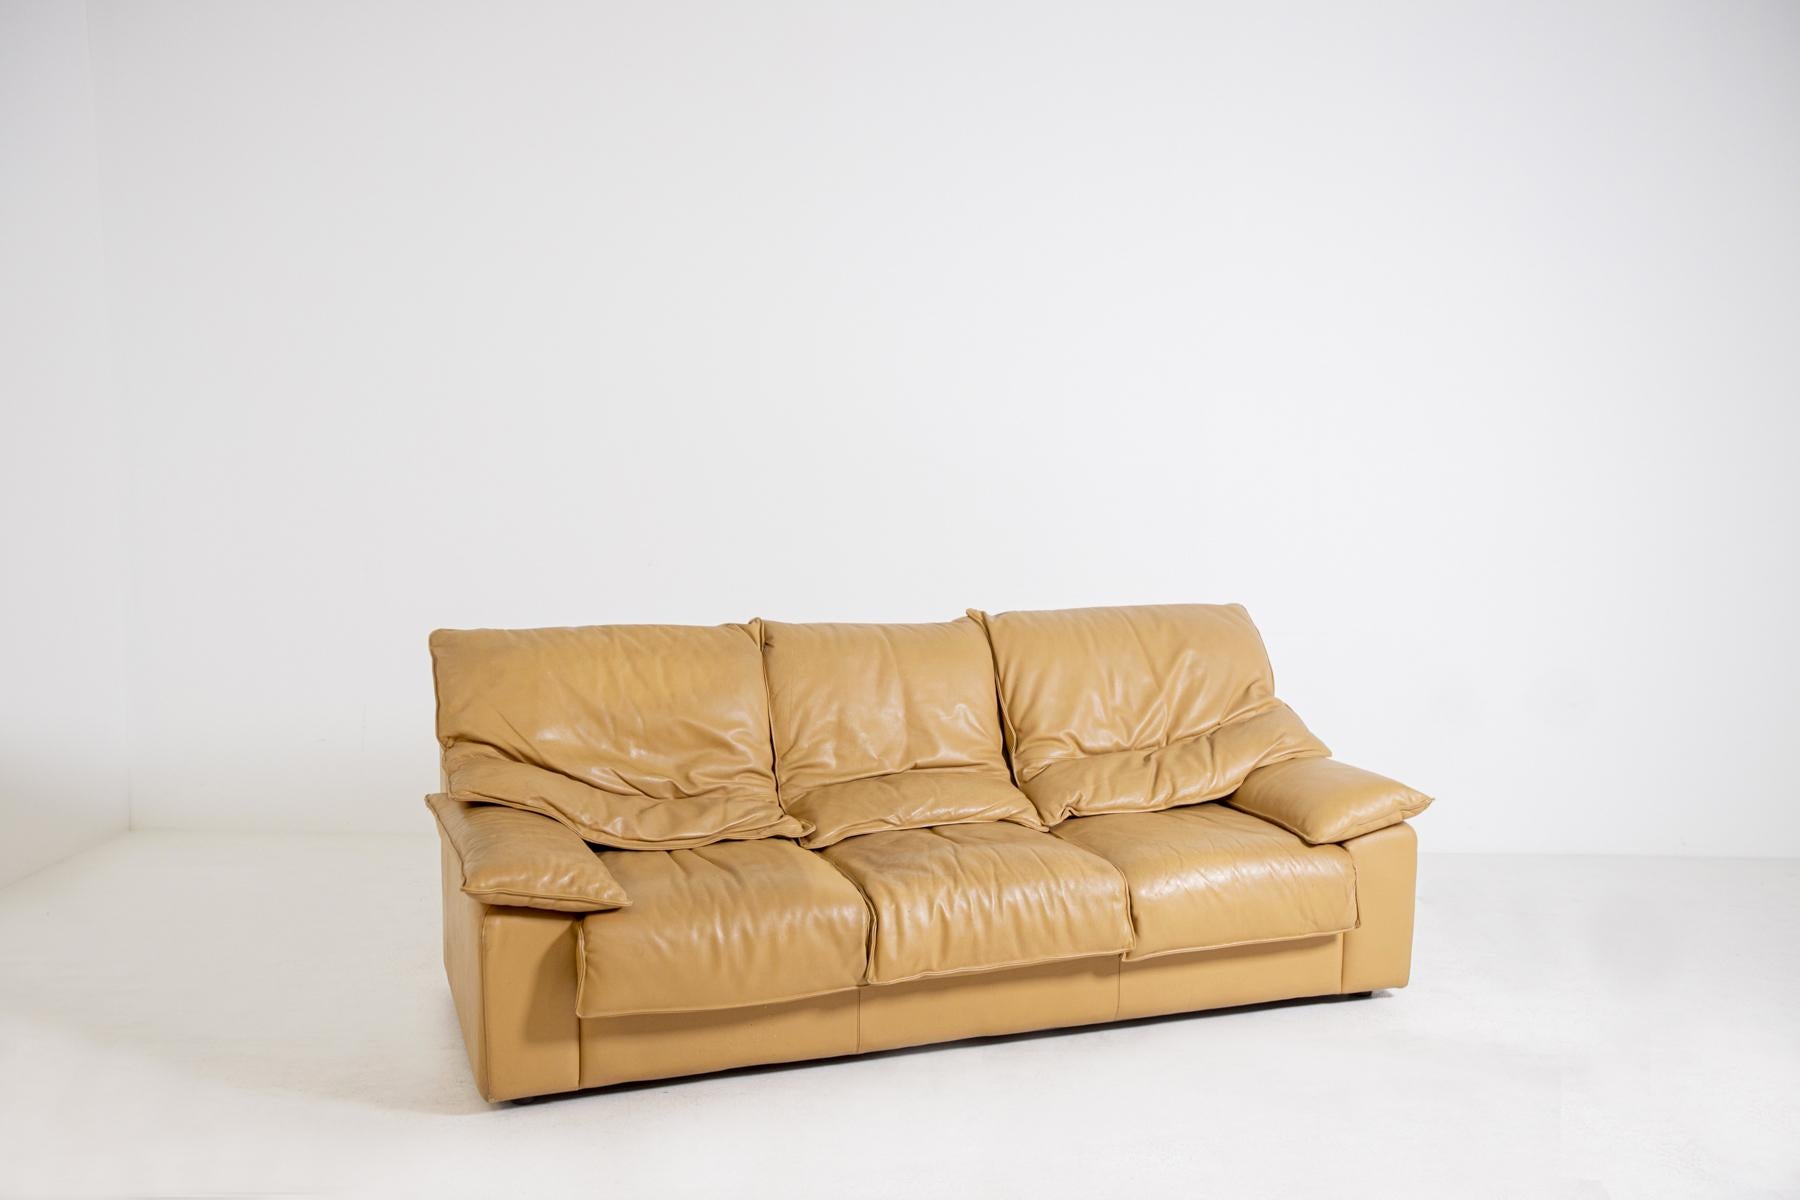 Italian-made three-seat sofa from the 1970s. The sofa is made of camel colored leather. The peculiarity of the sofa is in its double layer leather cushions.
Through the various layers of cushions the seat is received in a soft comfort. The sofa is